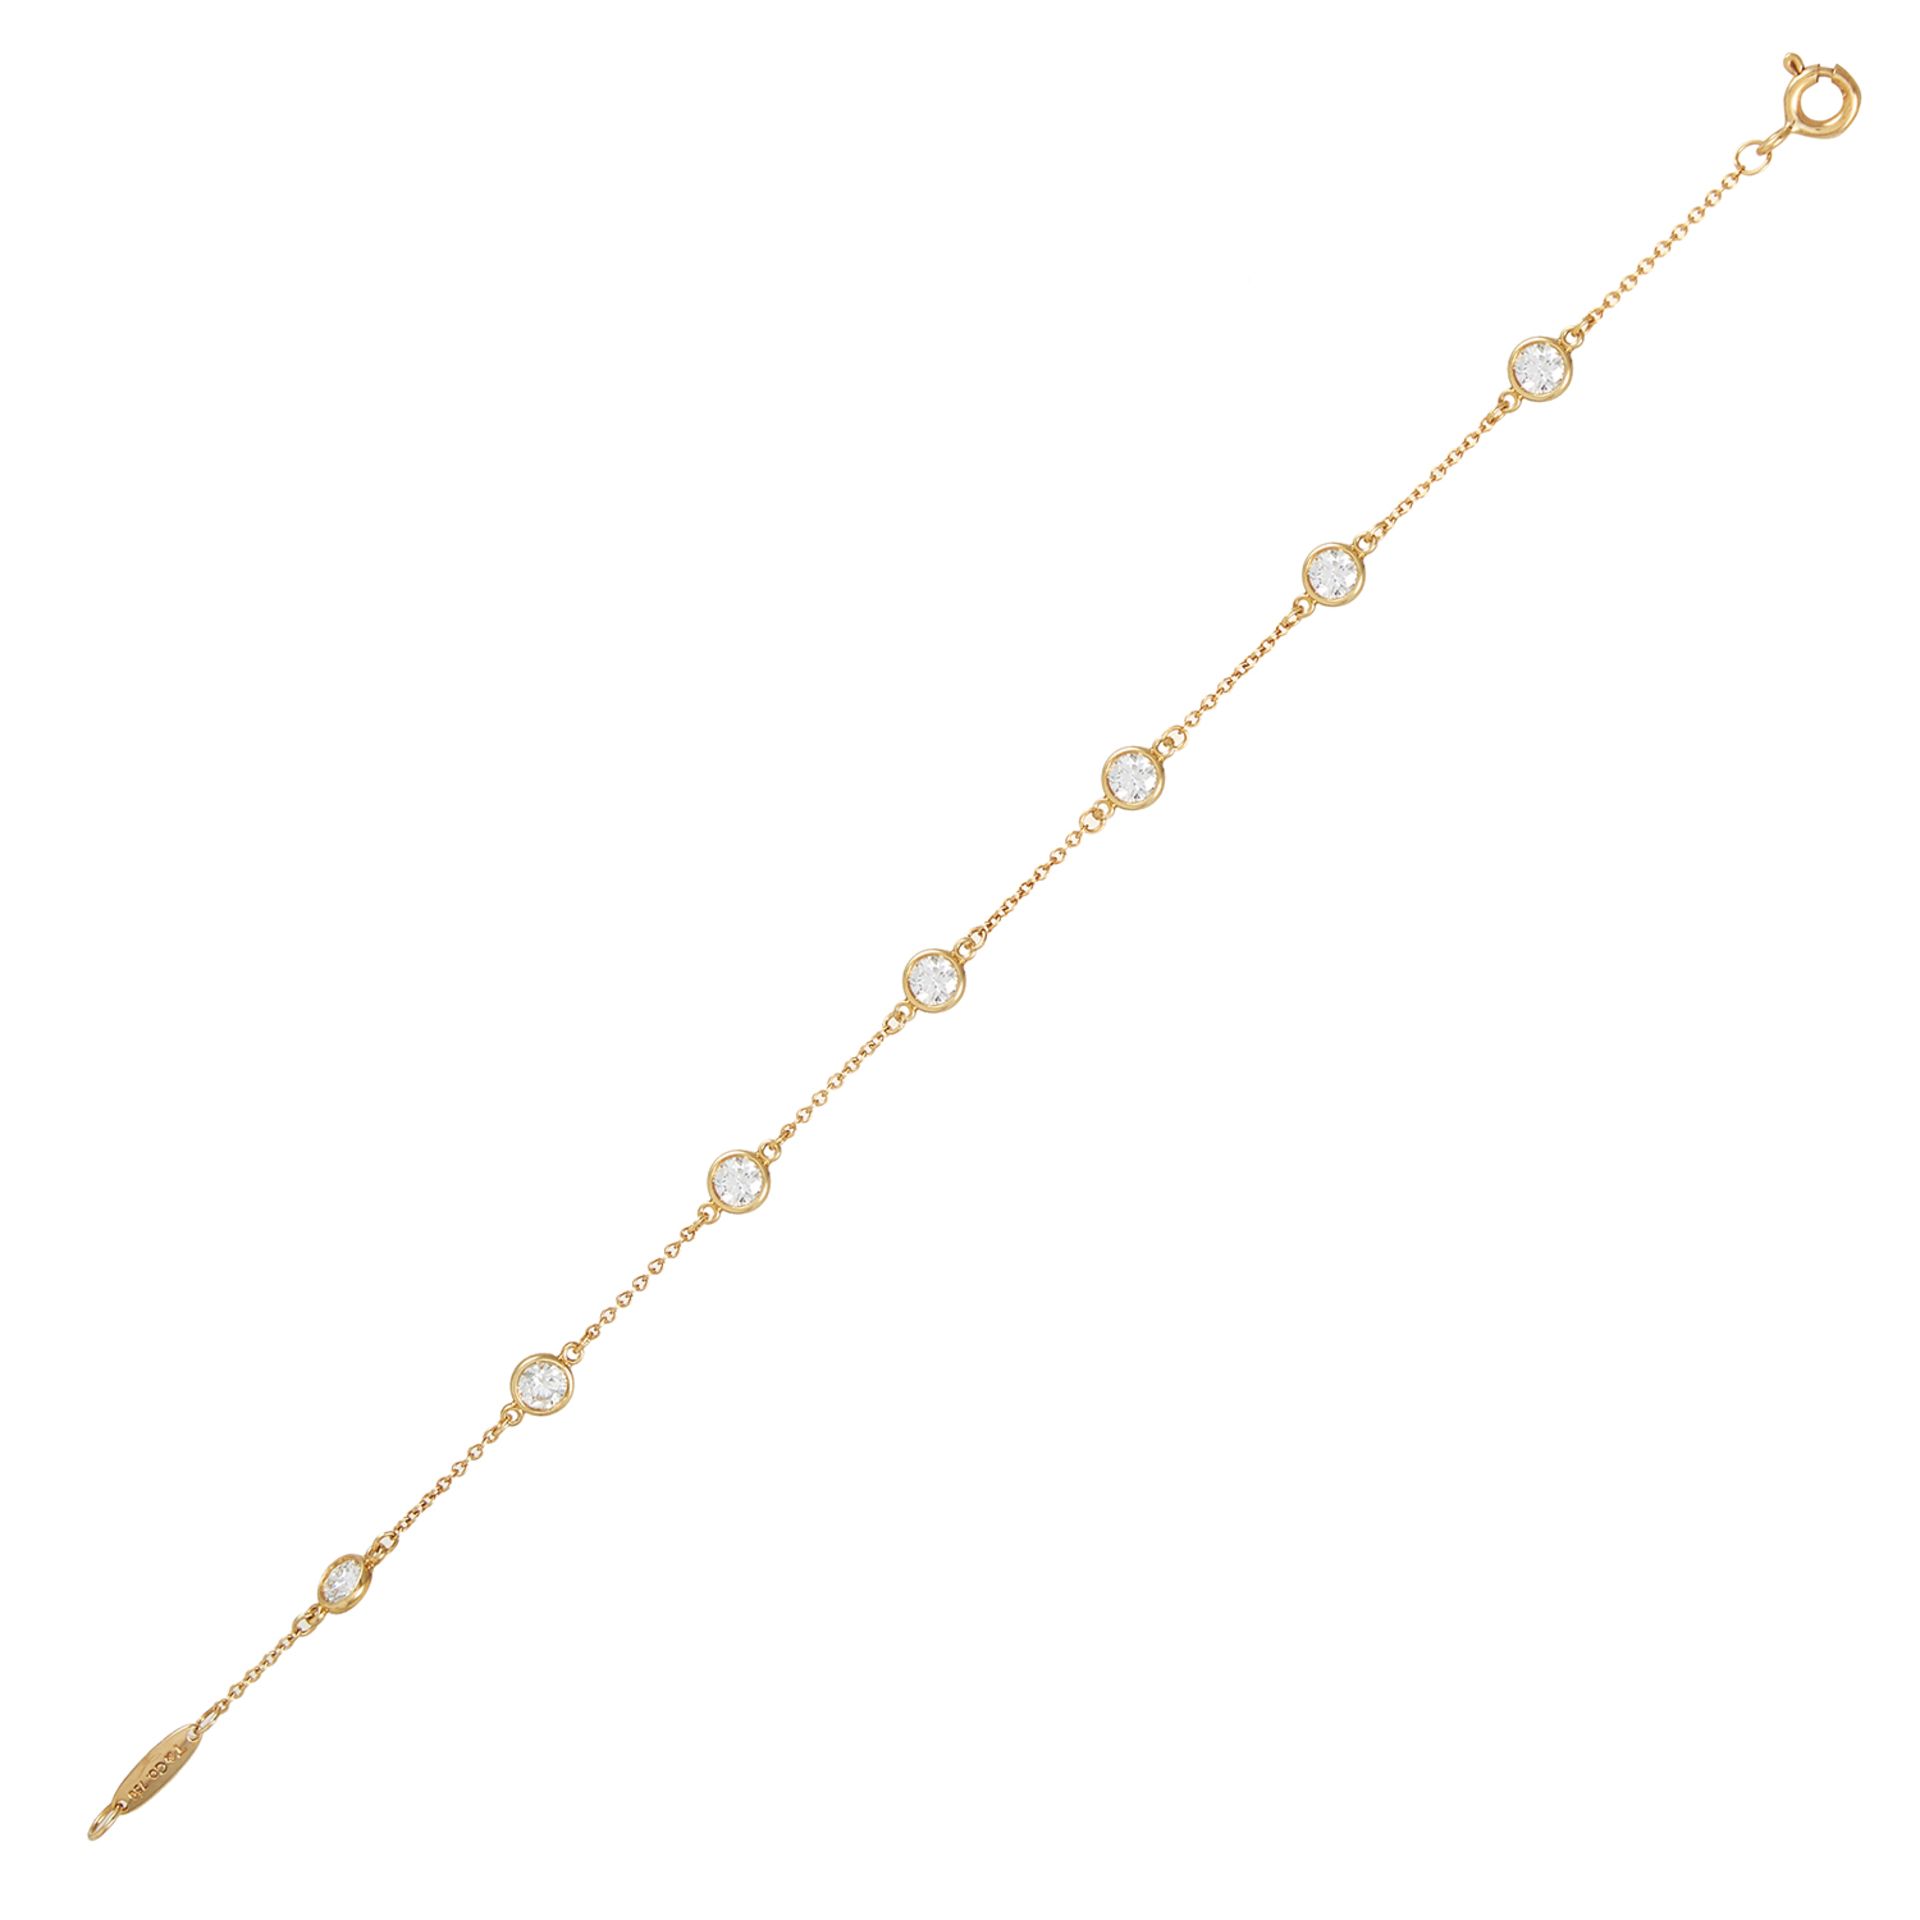 A 1.26 CARAT DIAMOND BRACELET, ELSA PERETTI FOR TIFFANY & CO in 18ct yellow gold, set with seven